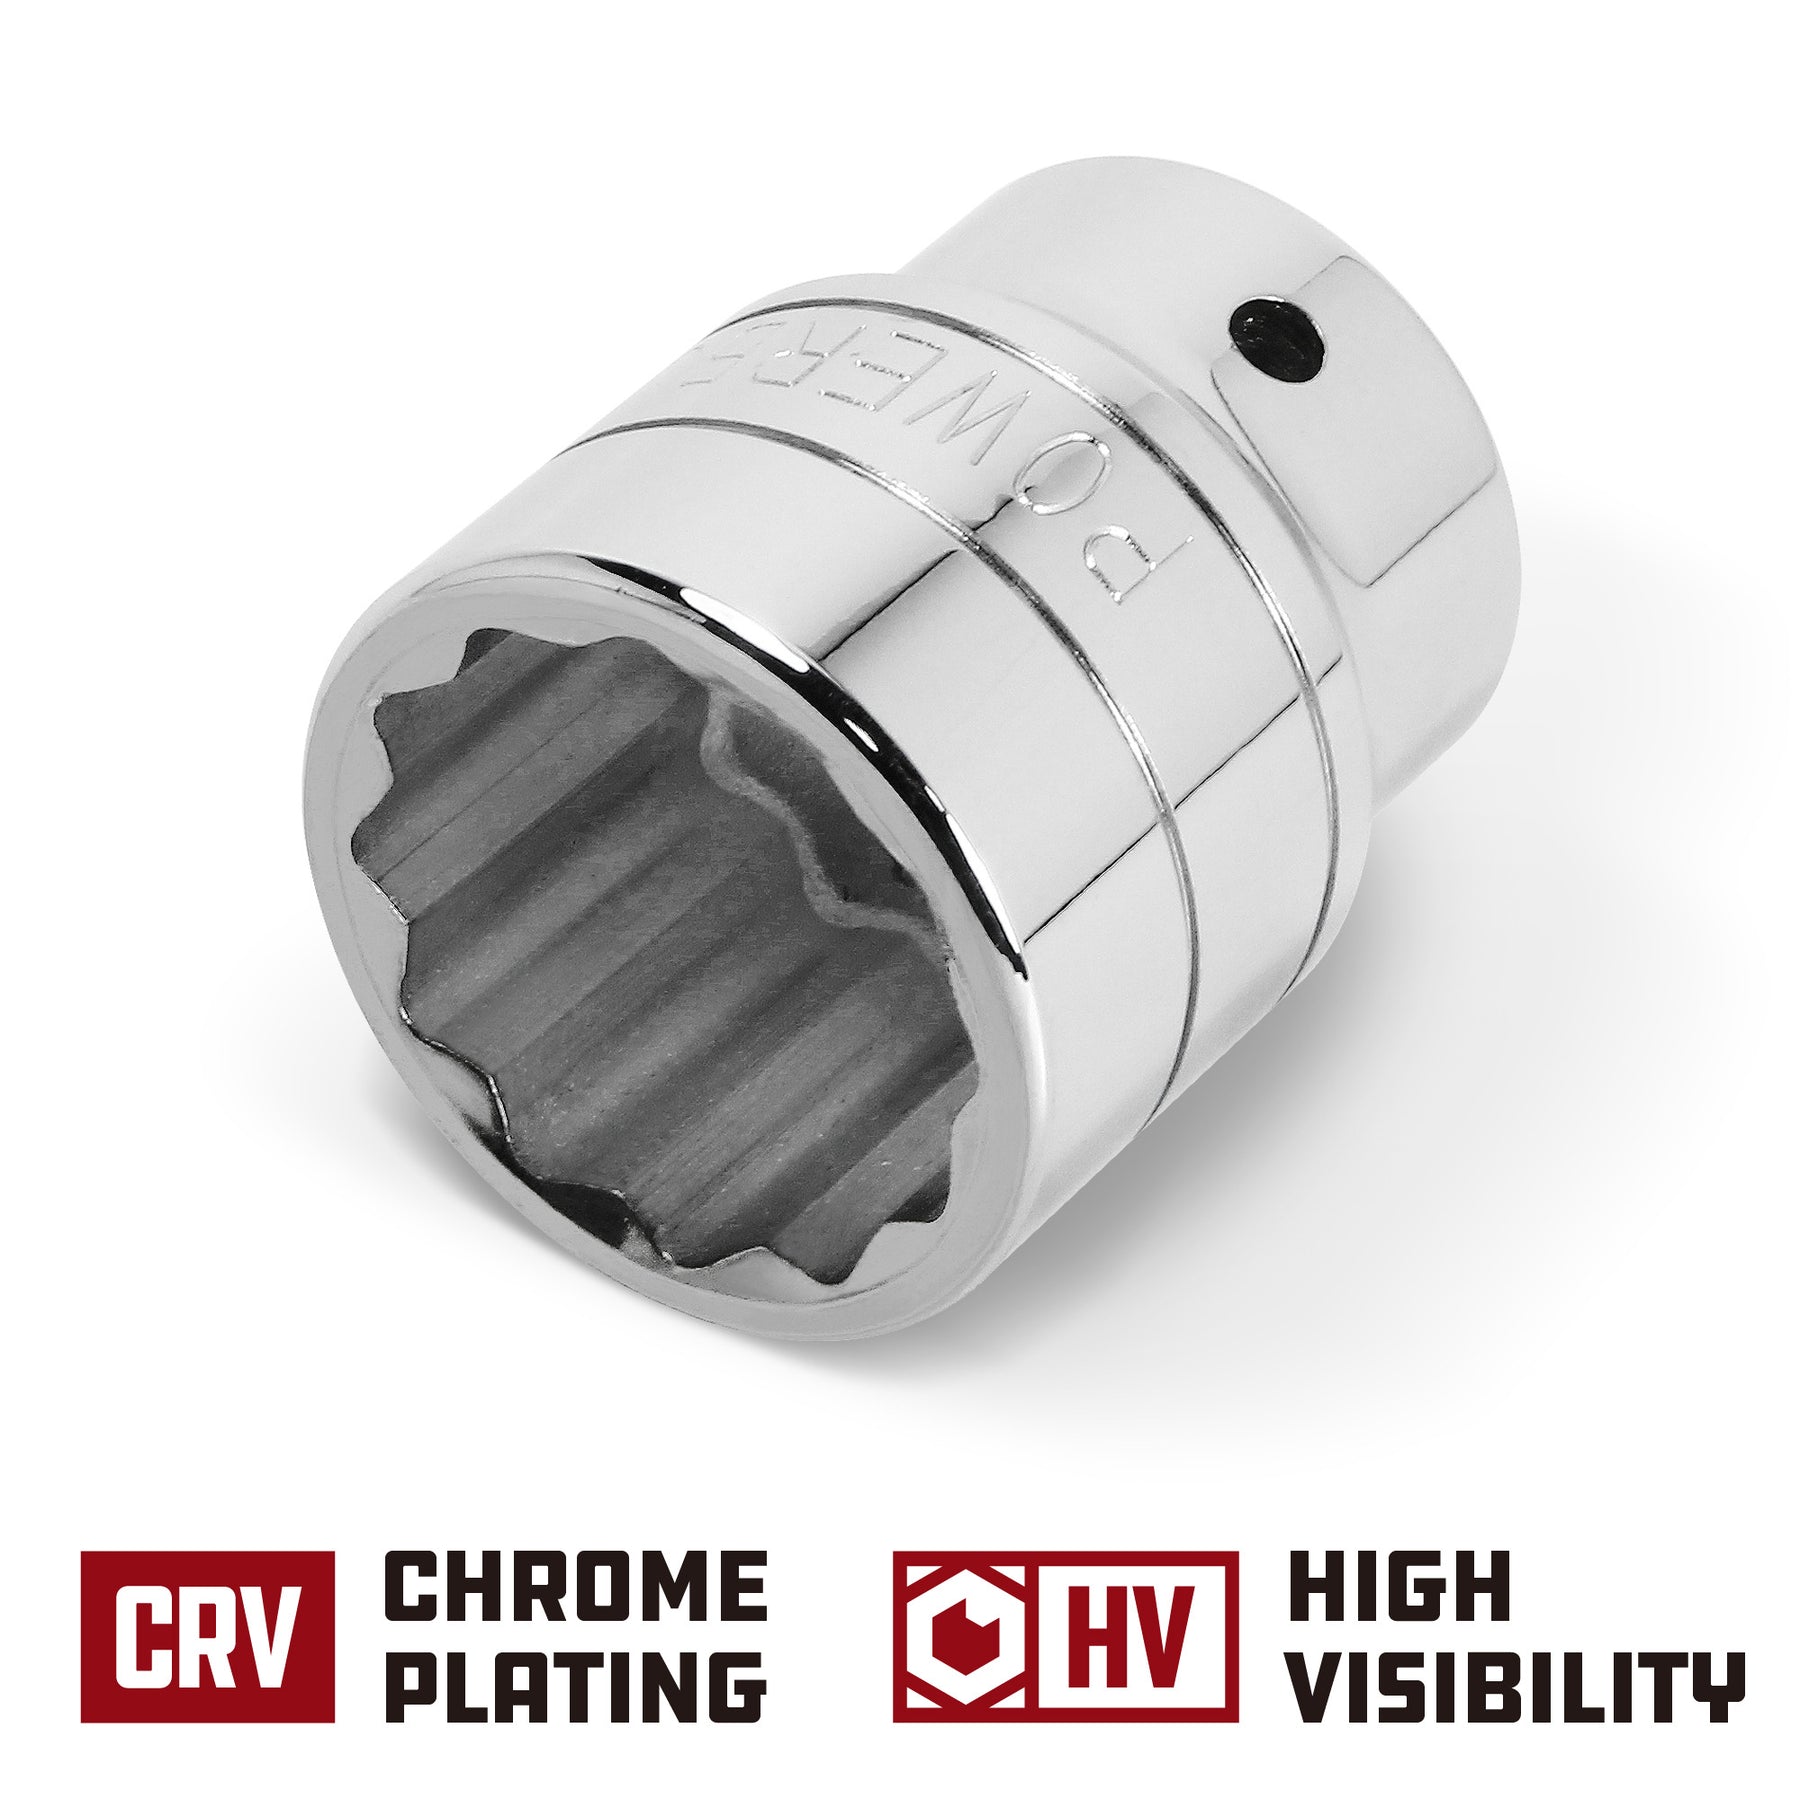 3/4 Inch Drive x 36 MM 12 Point Shallow Socket